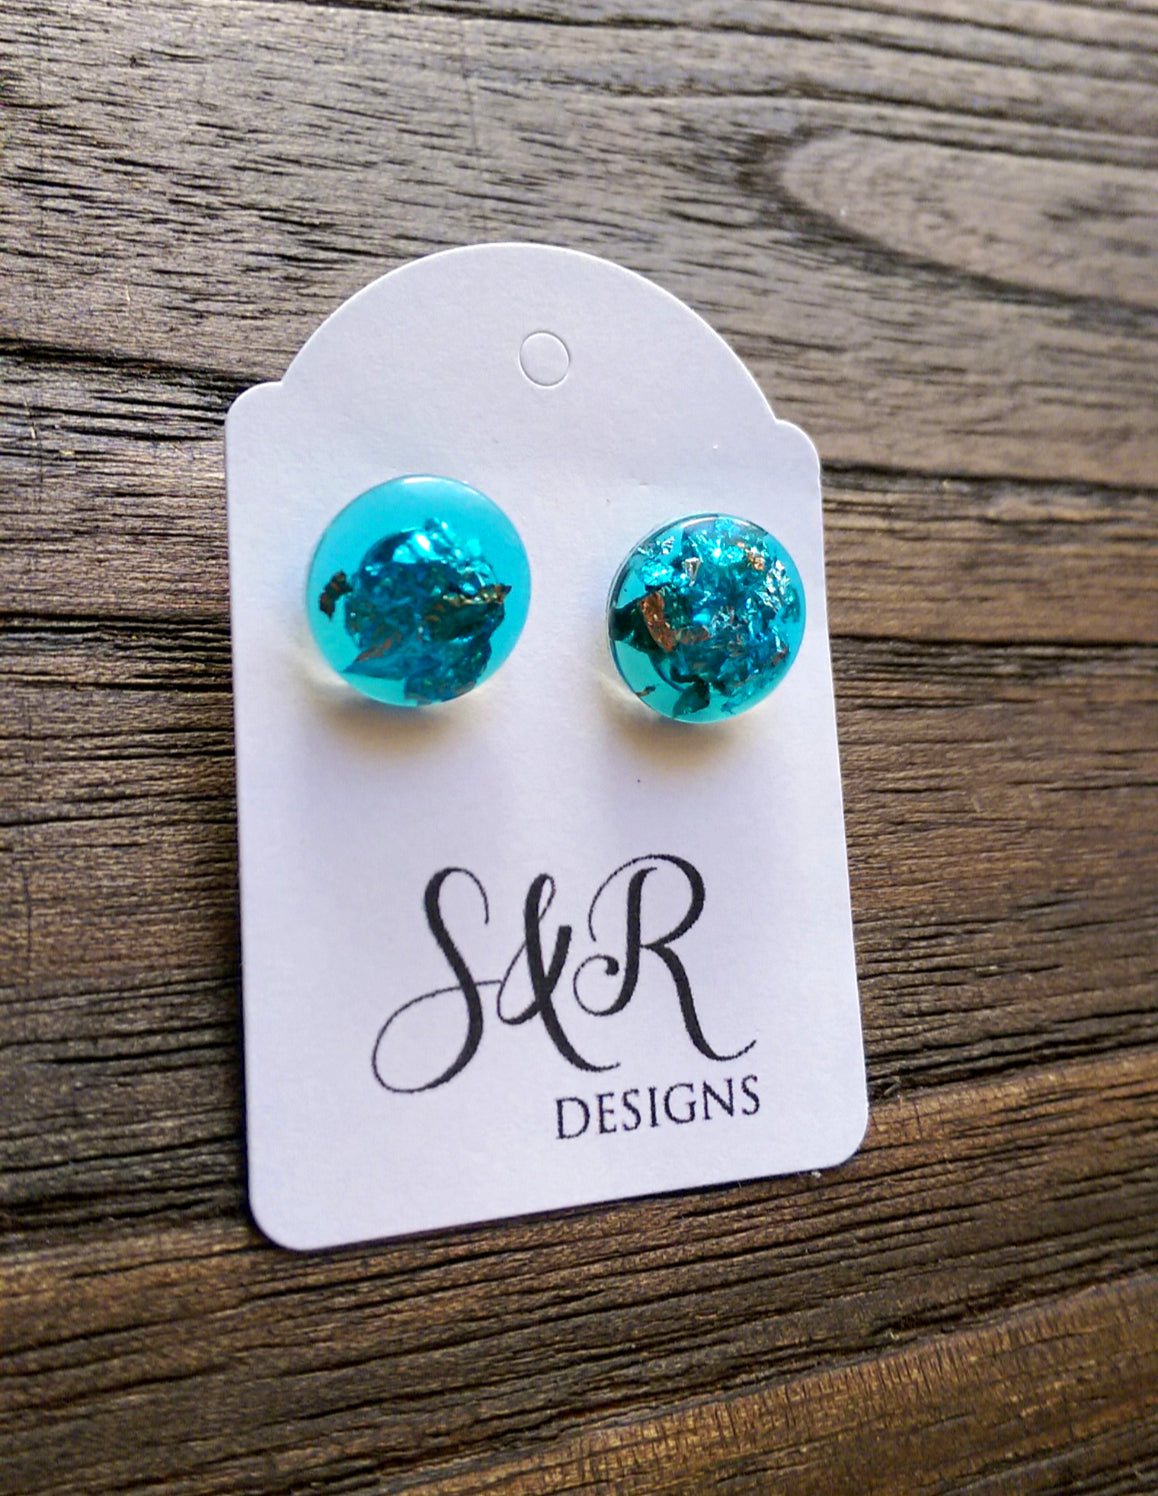 Brilliant Blue Silver Mix Leaf Circle Resin Stud Earrings, Stainless Steel Stud Earrings. 12mm - Silver and Resin Designs